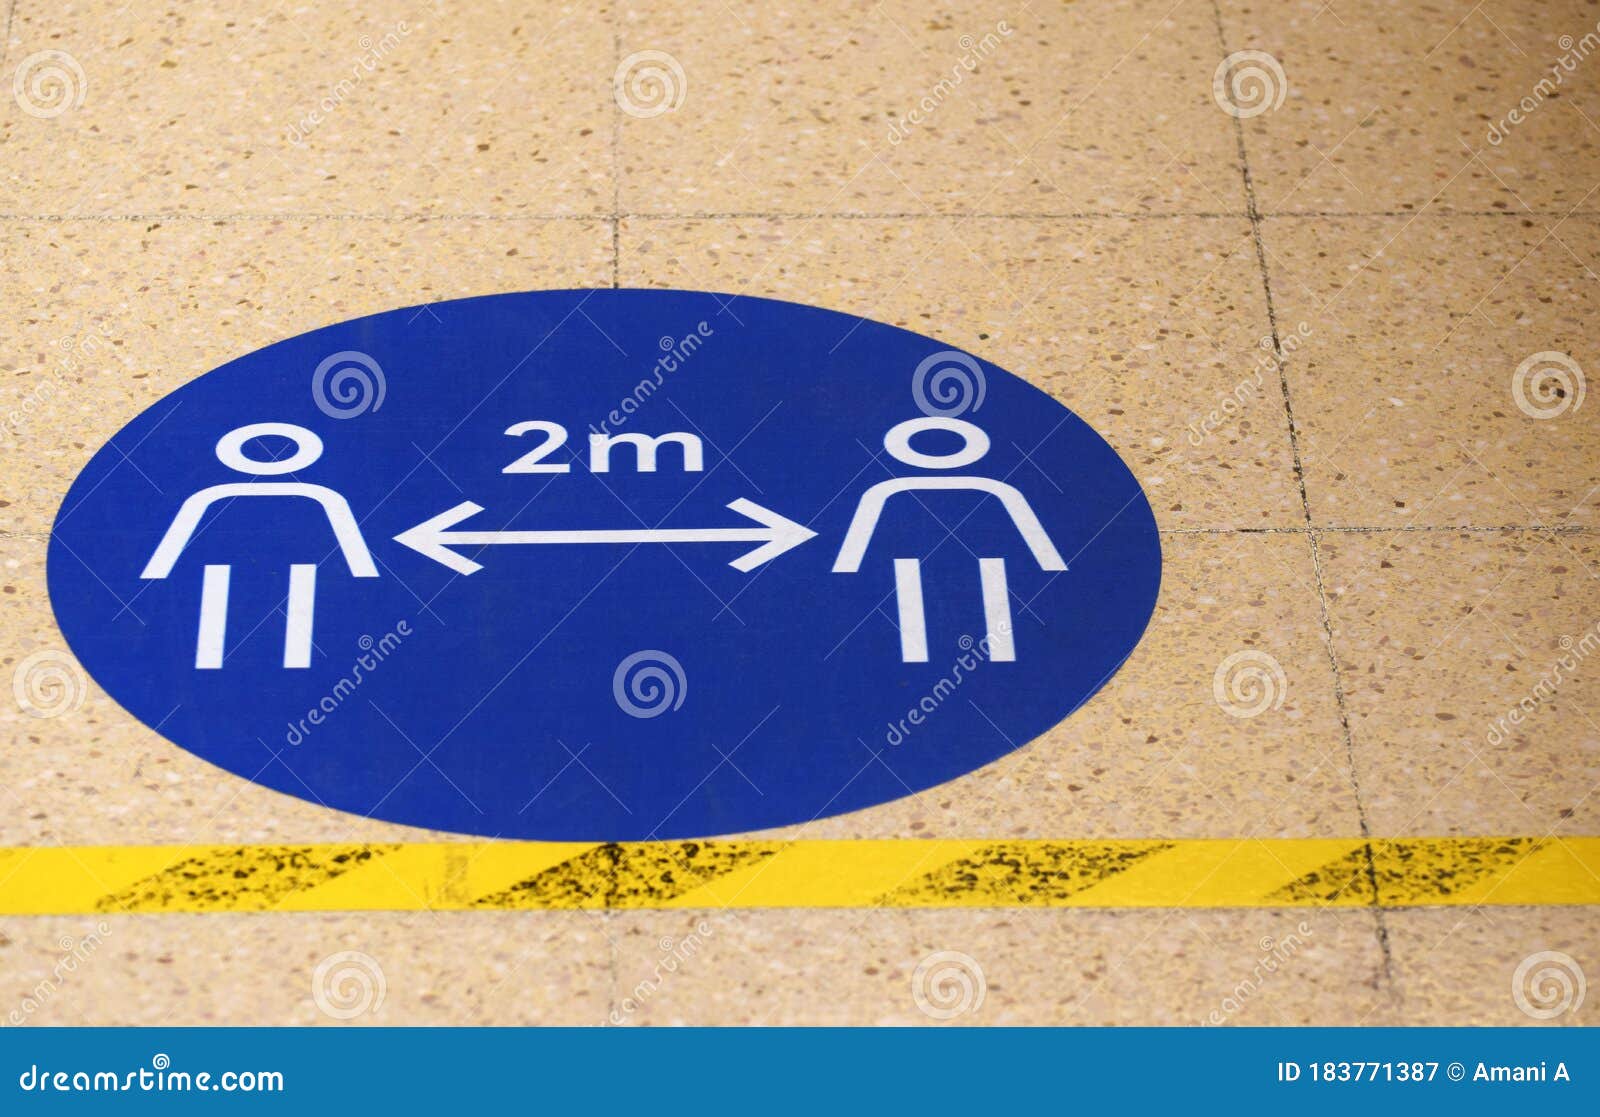 a sign / marker on a grocery supermarket shop floor showing the social distancing spacing of 2 metres